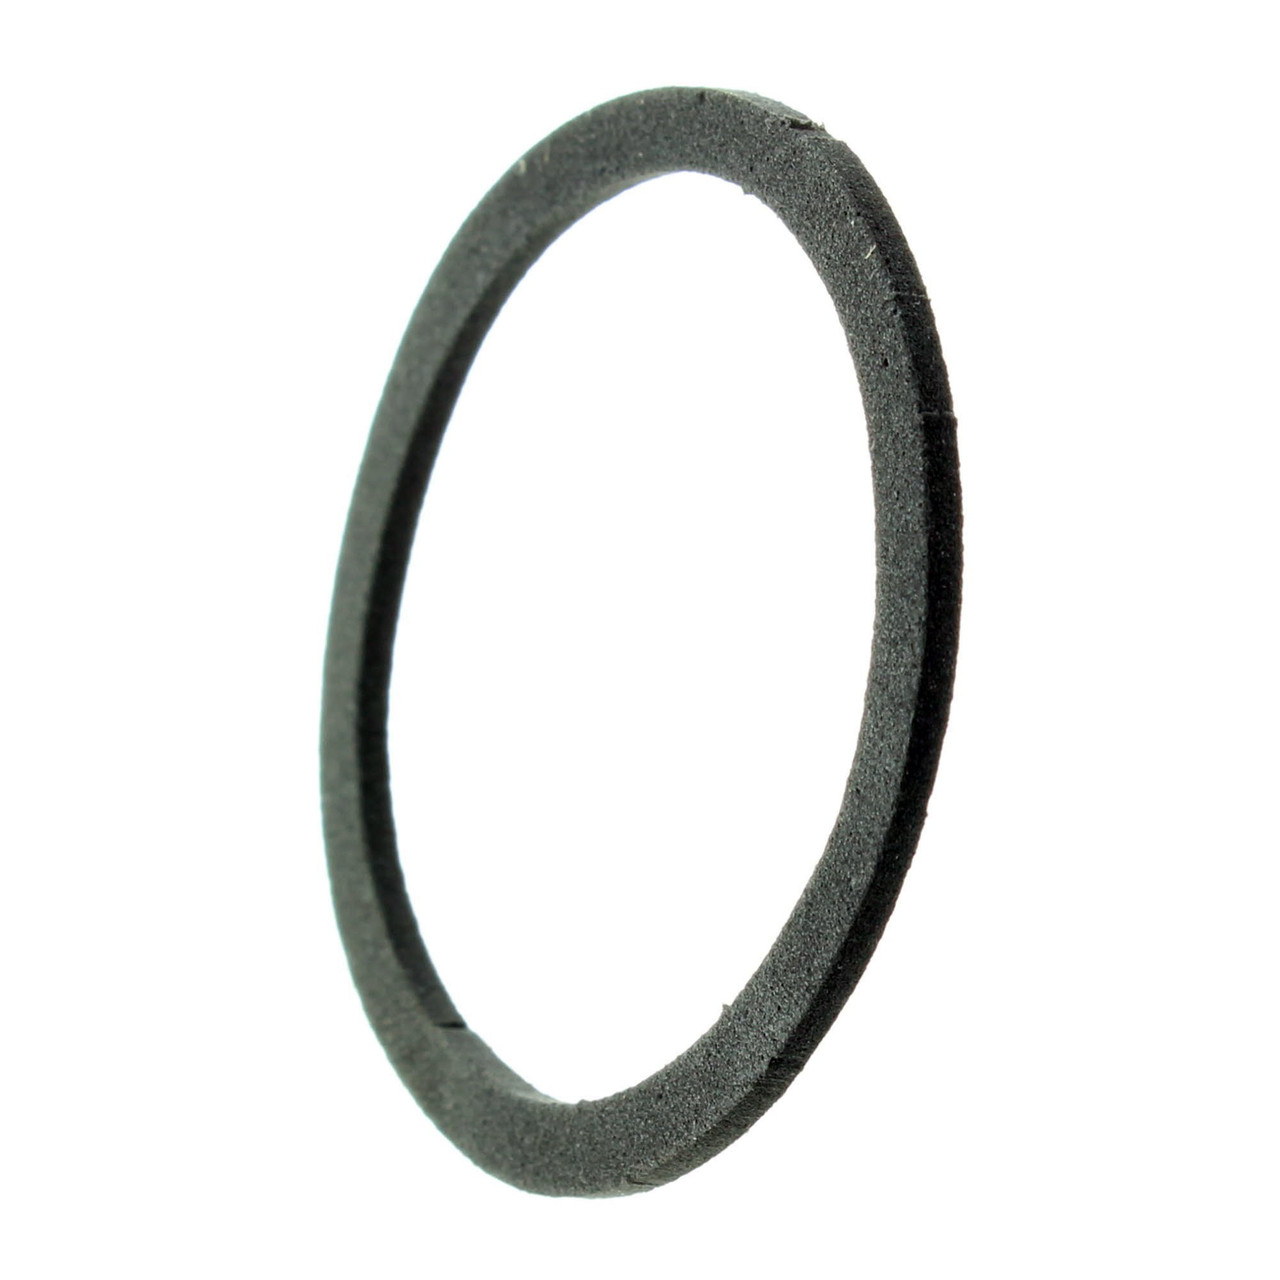 Sea-Doo New OEM Front Storage Compartment Compensation Gasket, 204620045